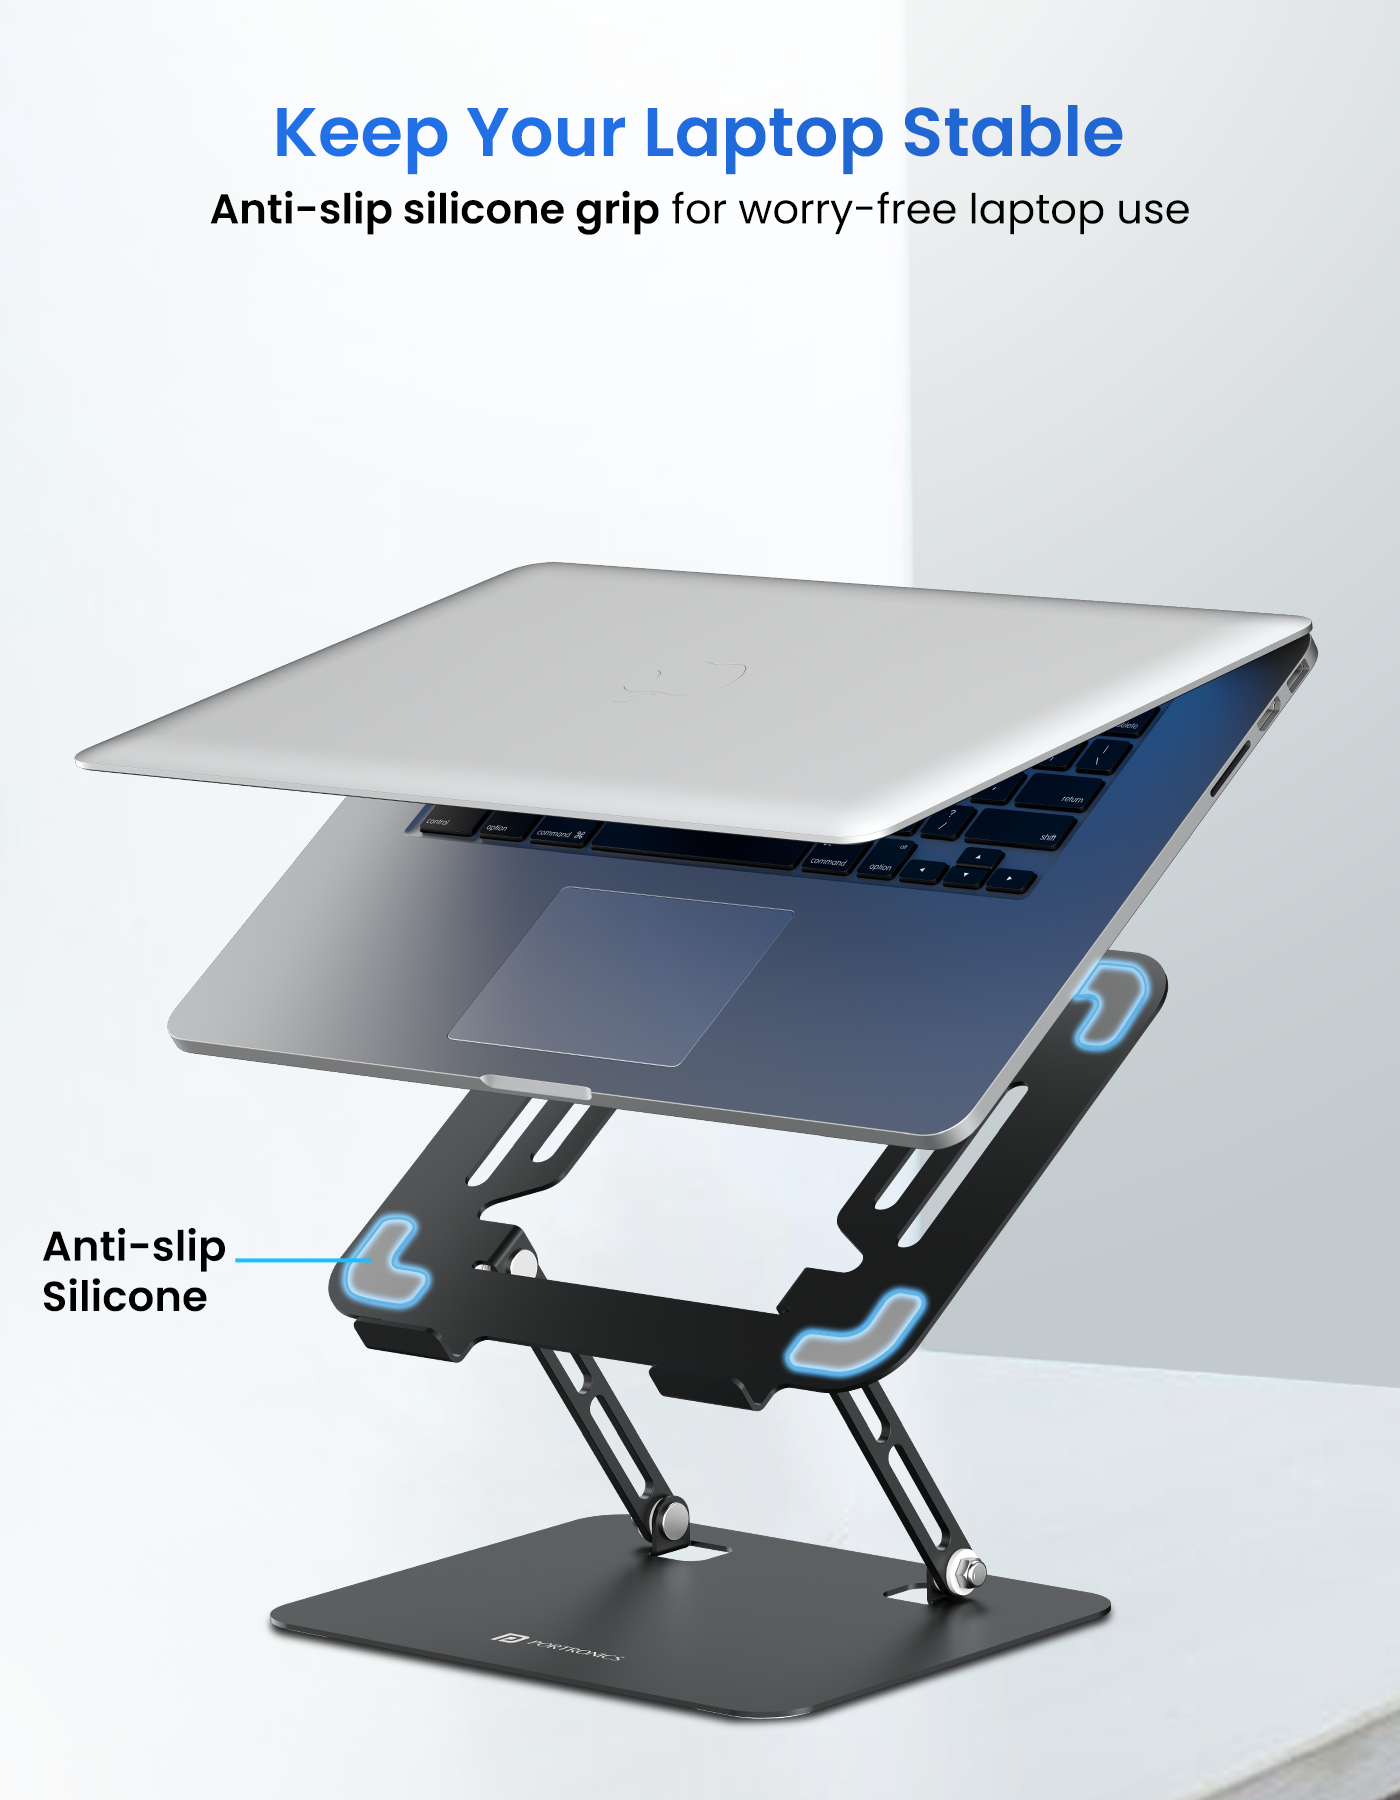 Portronics My Buddy K3 Pro laptop stand compatible up to 15.6 inches laptop